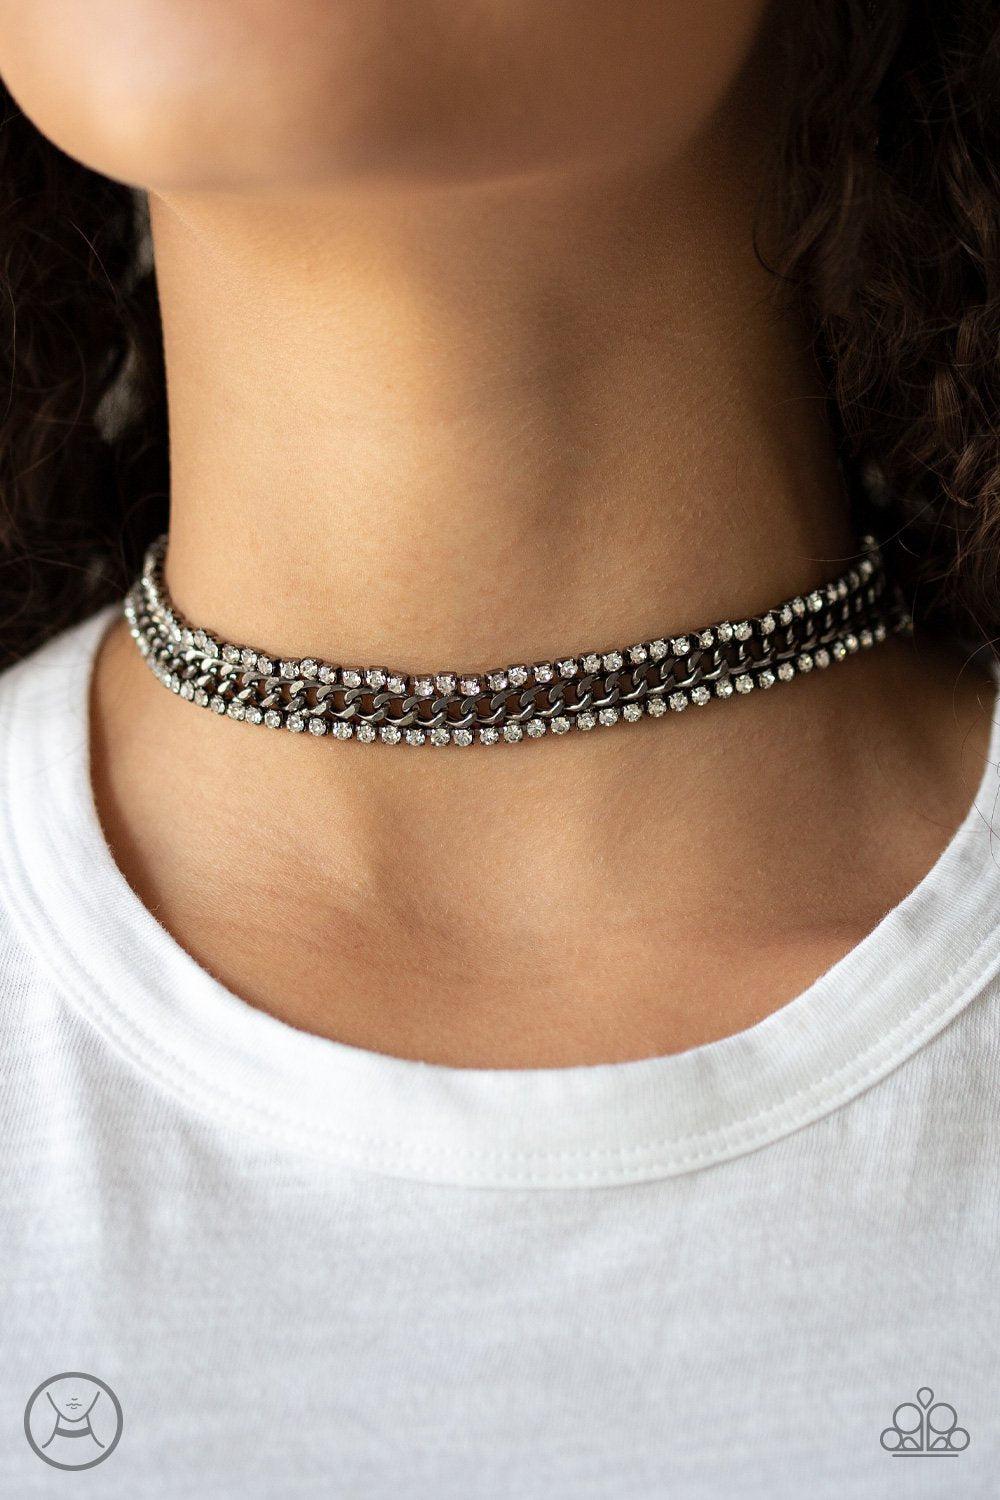 Empo-HER-ment - Black Hematite Choker Necklace - Paparazzi Accessories-CarasShop.com - $5 Jewelry by Cara Jewels